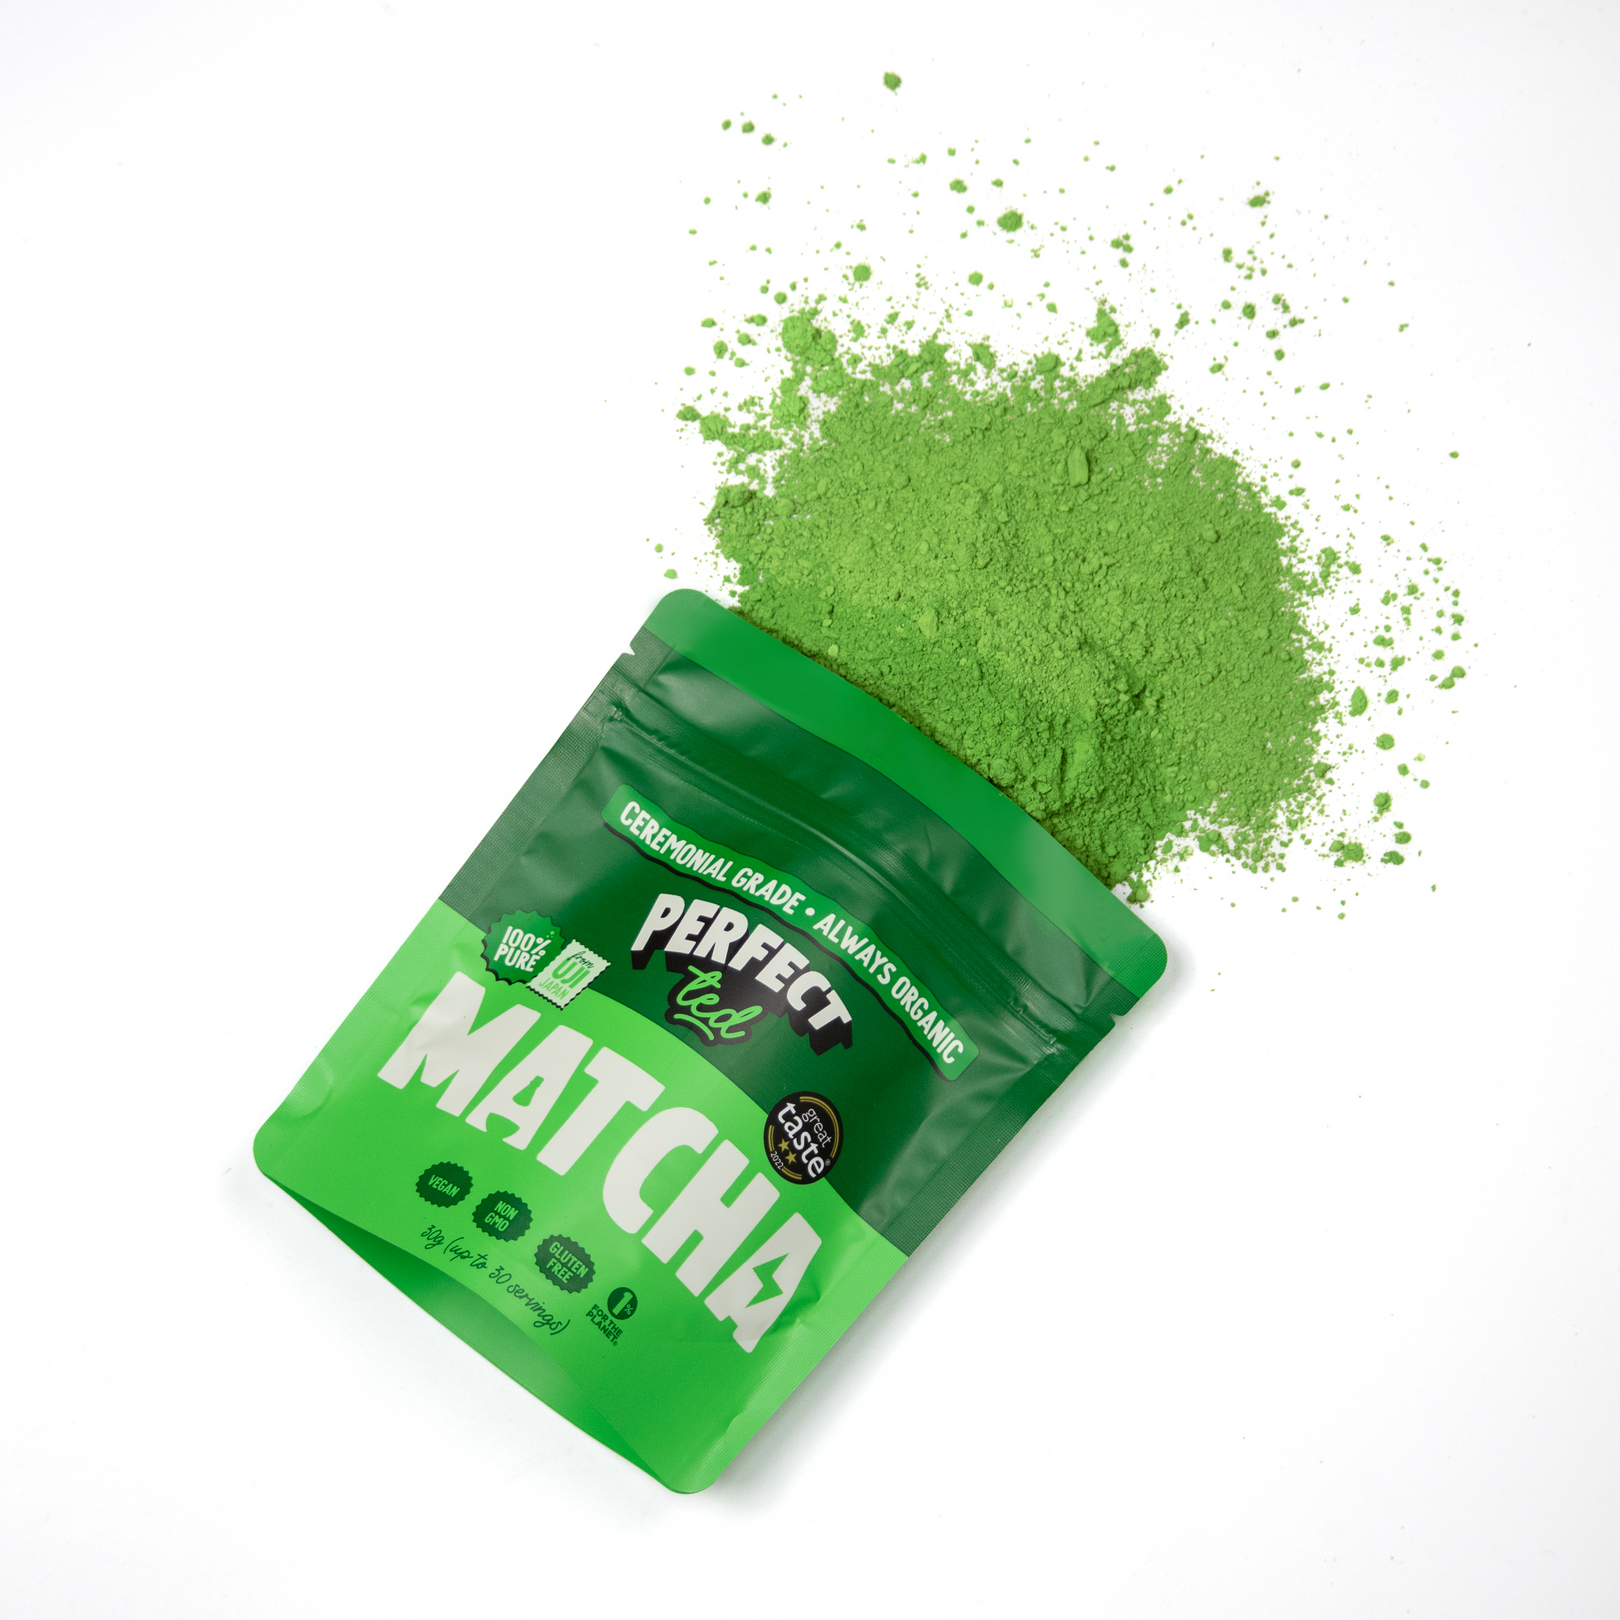 Perfect Ted Pack of 30g matcha green tea laying down with matcha powder spilling out.